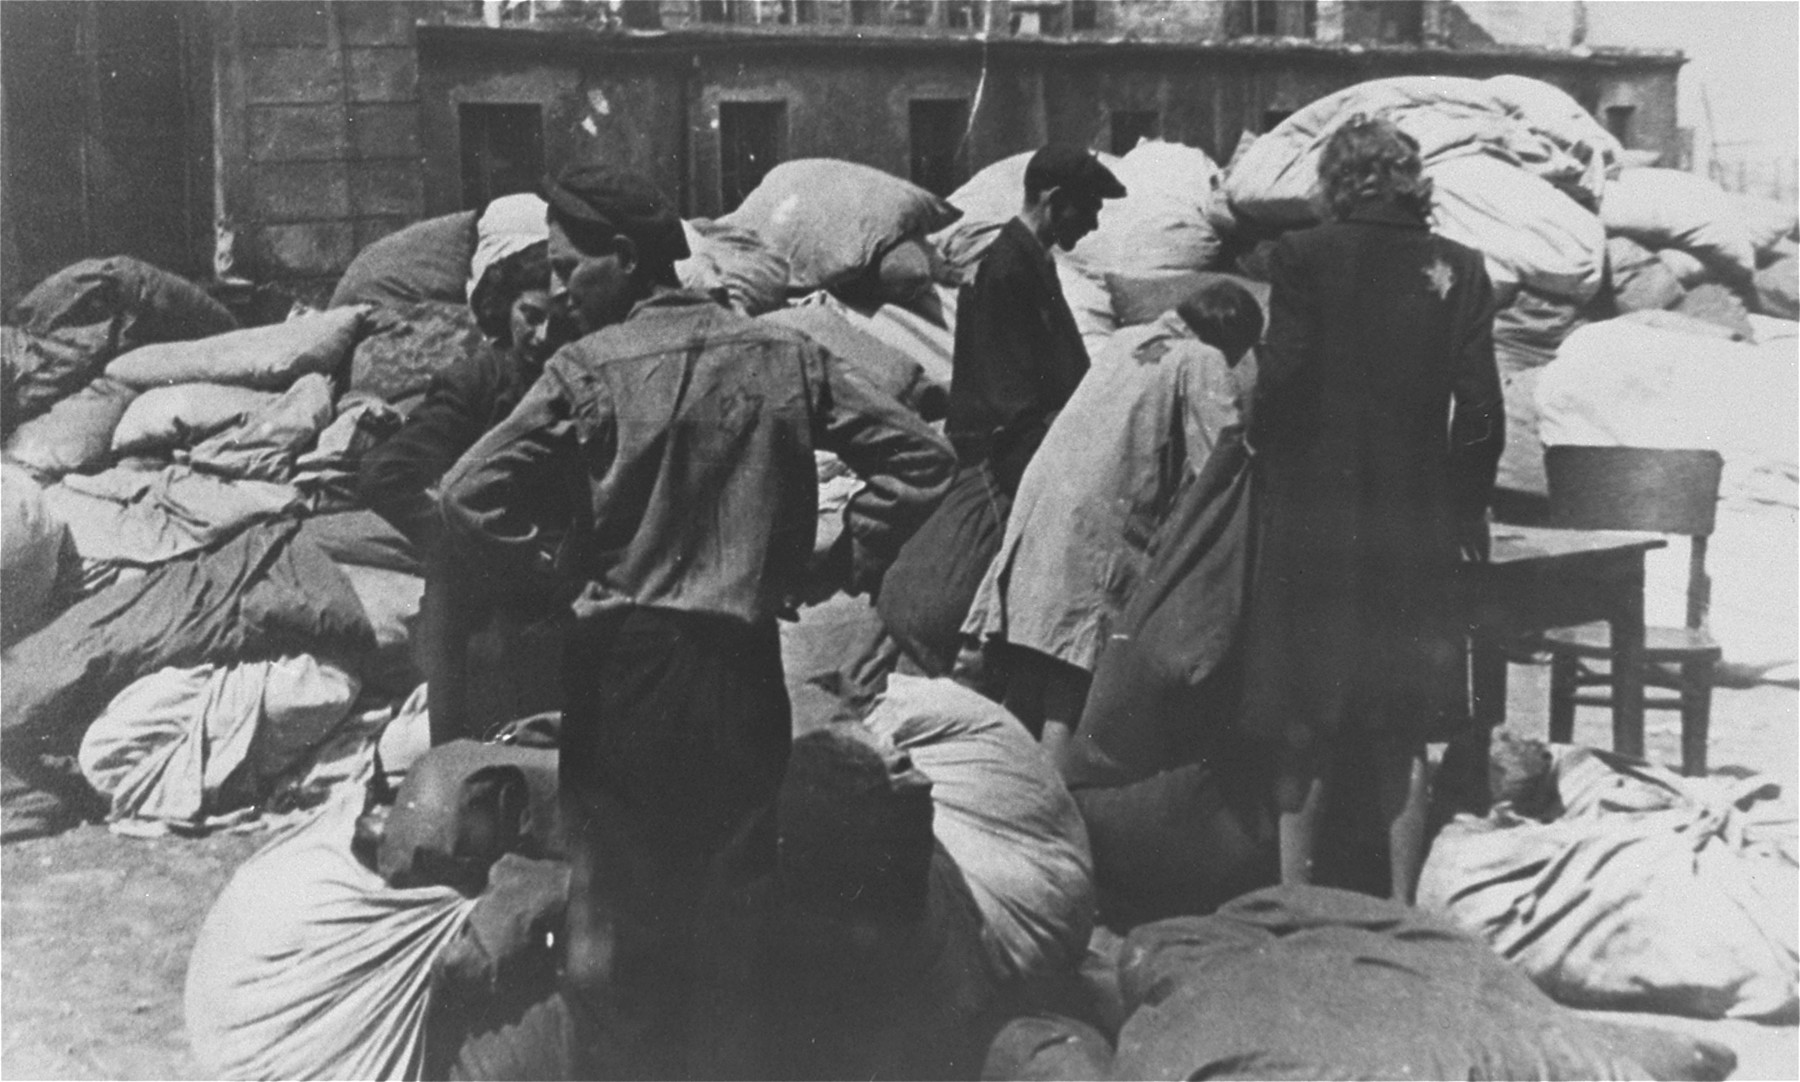 Jewish men and women prepare to sort  clothing that was confiscated from the deportees to the Chelmno death camp.